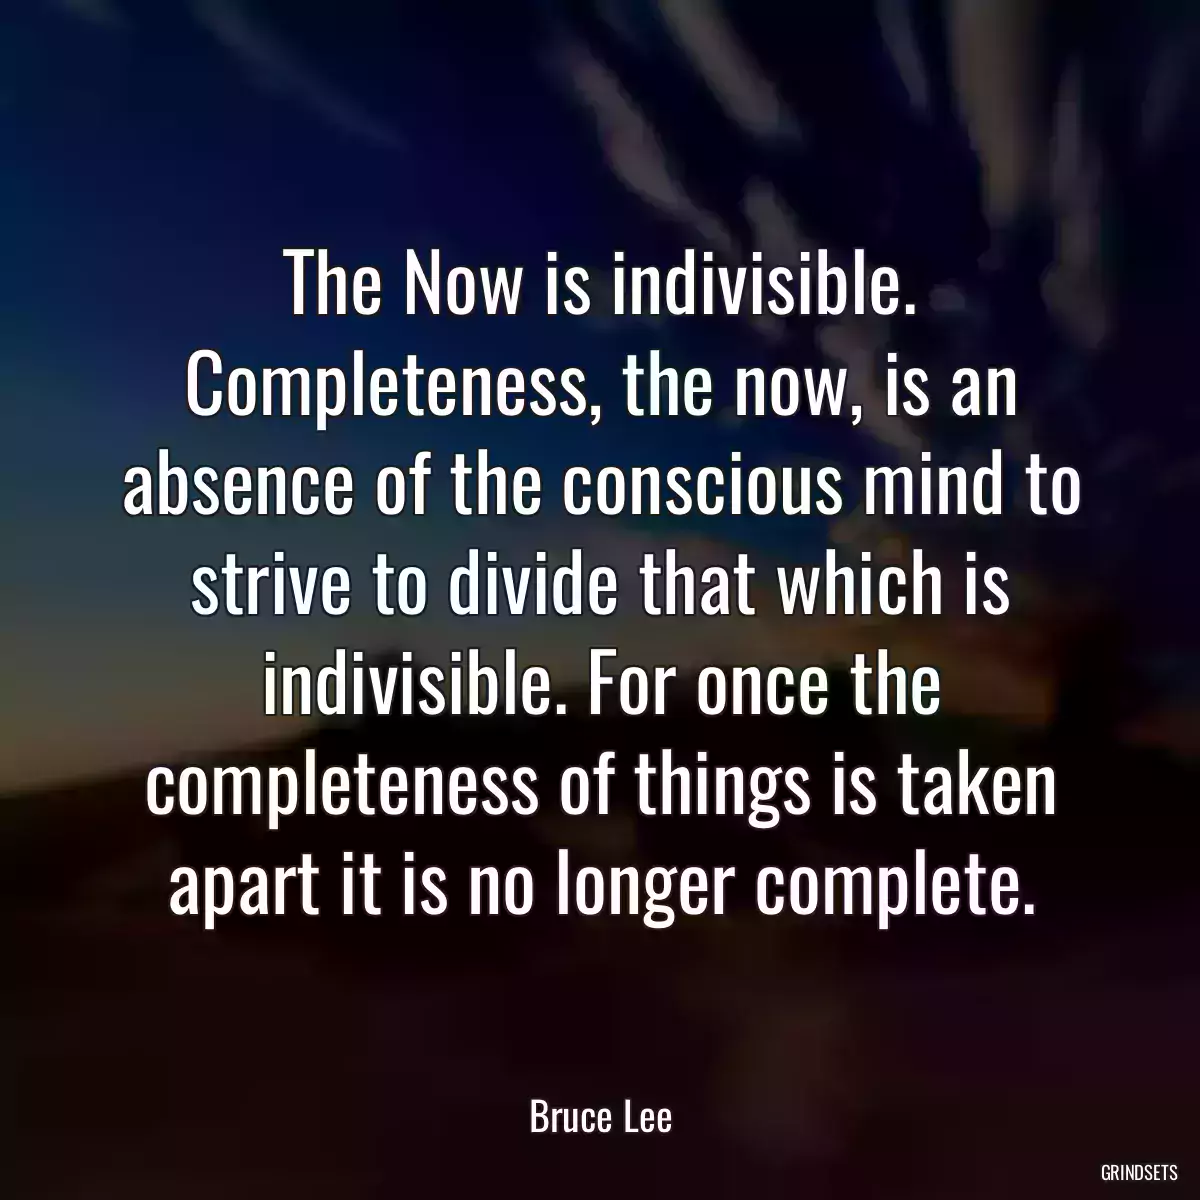 The Now is indivisible. Completeness, the now, is an absence of the conscious mind to strive to divide that which is indivisible. For once the completeness of things is taken apart it is no longer complete.